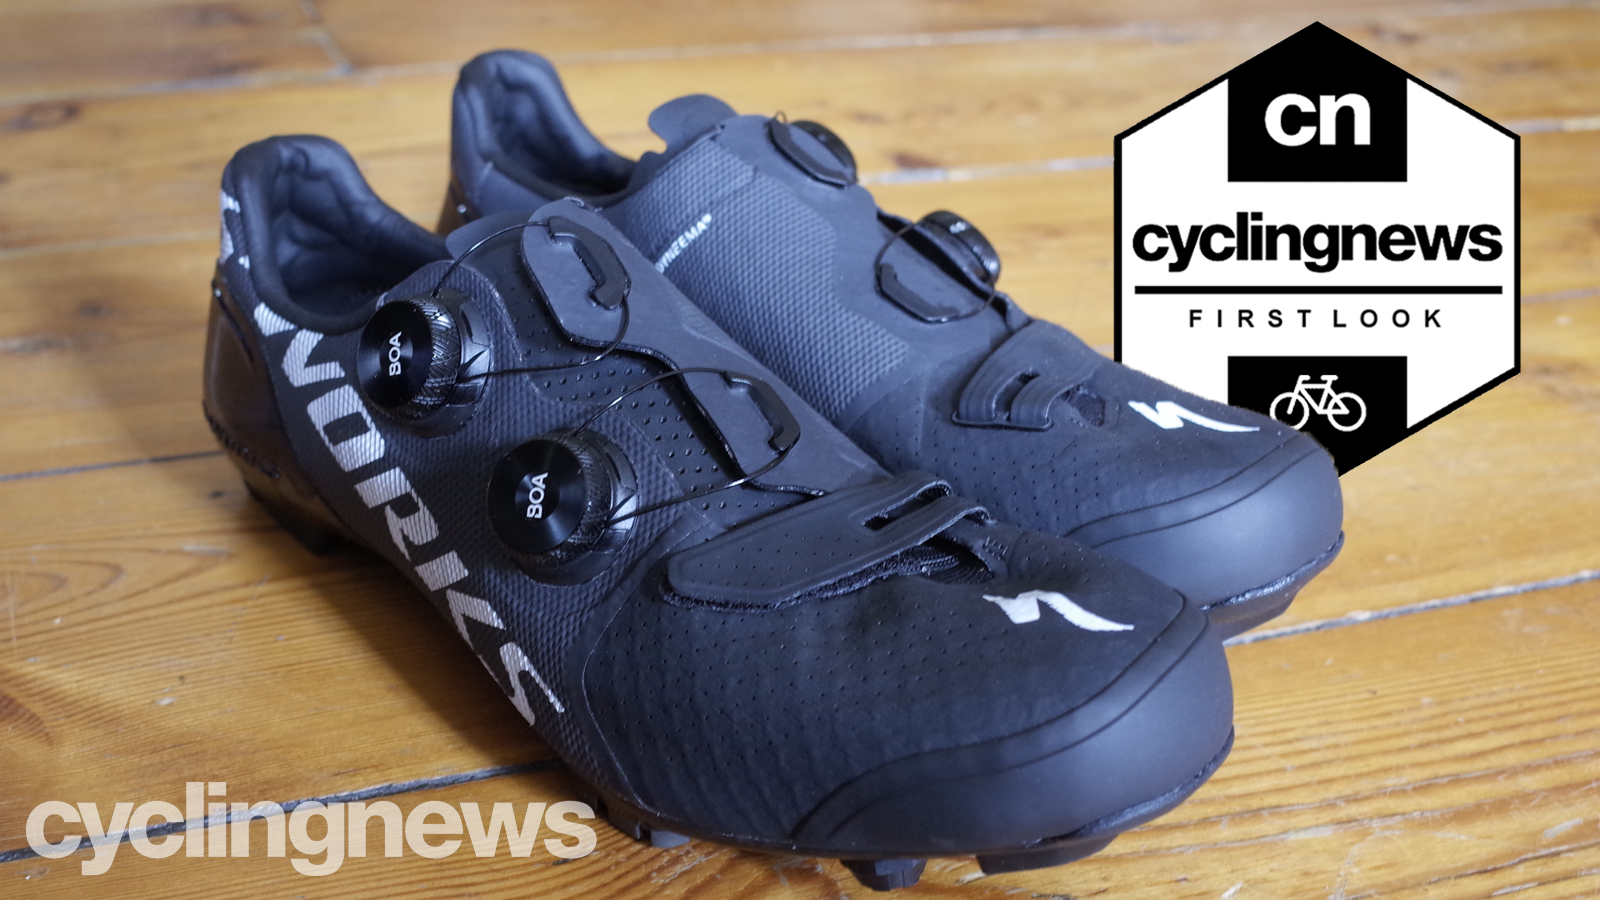 s works recon shoe